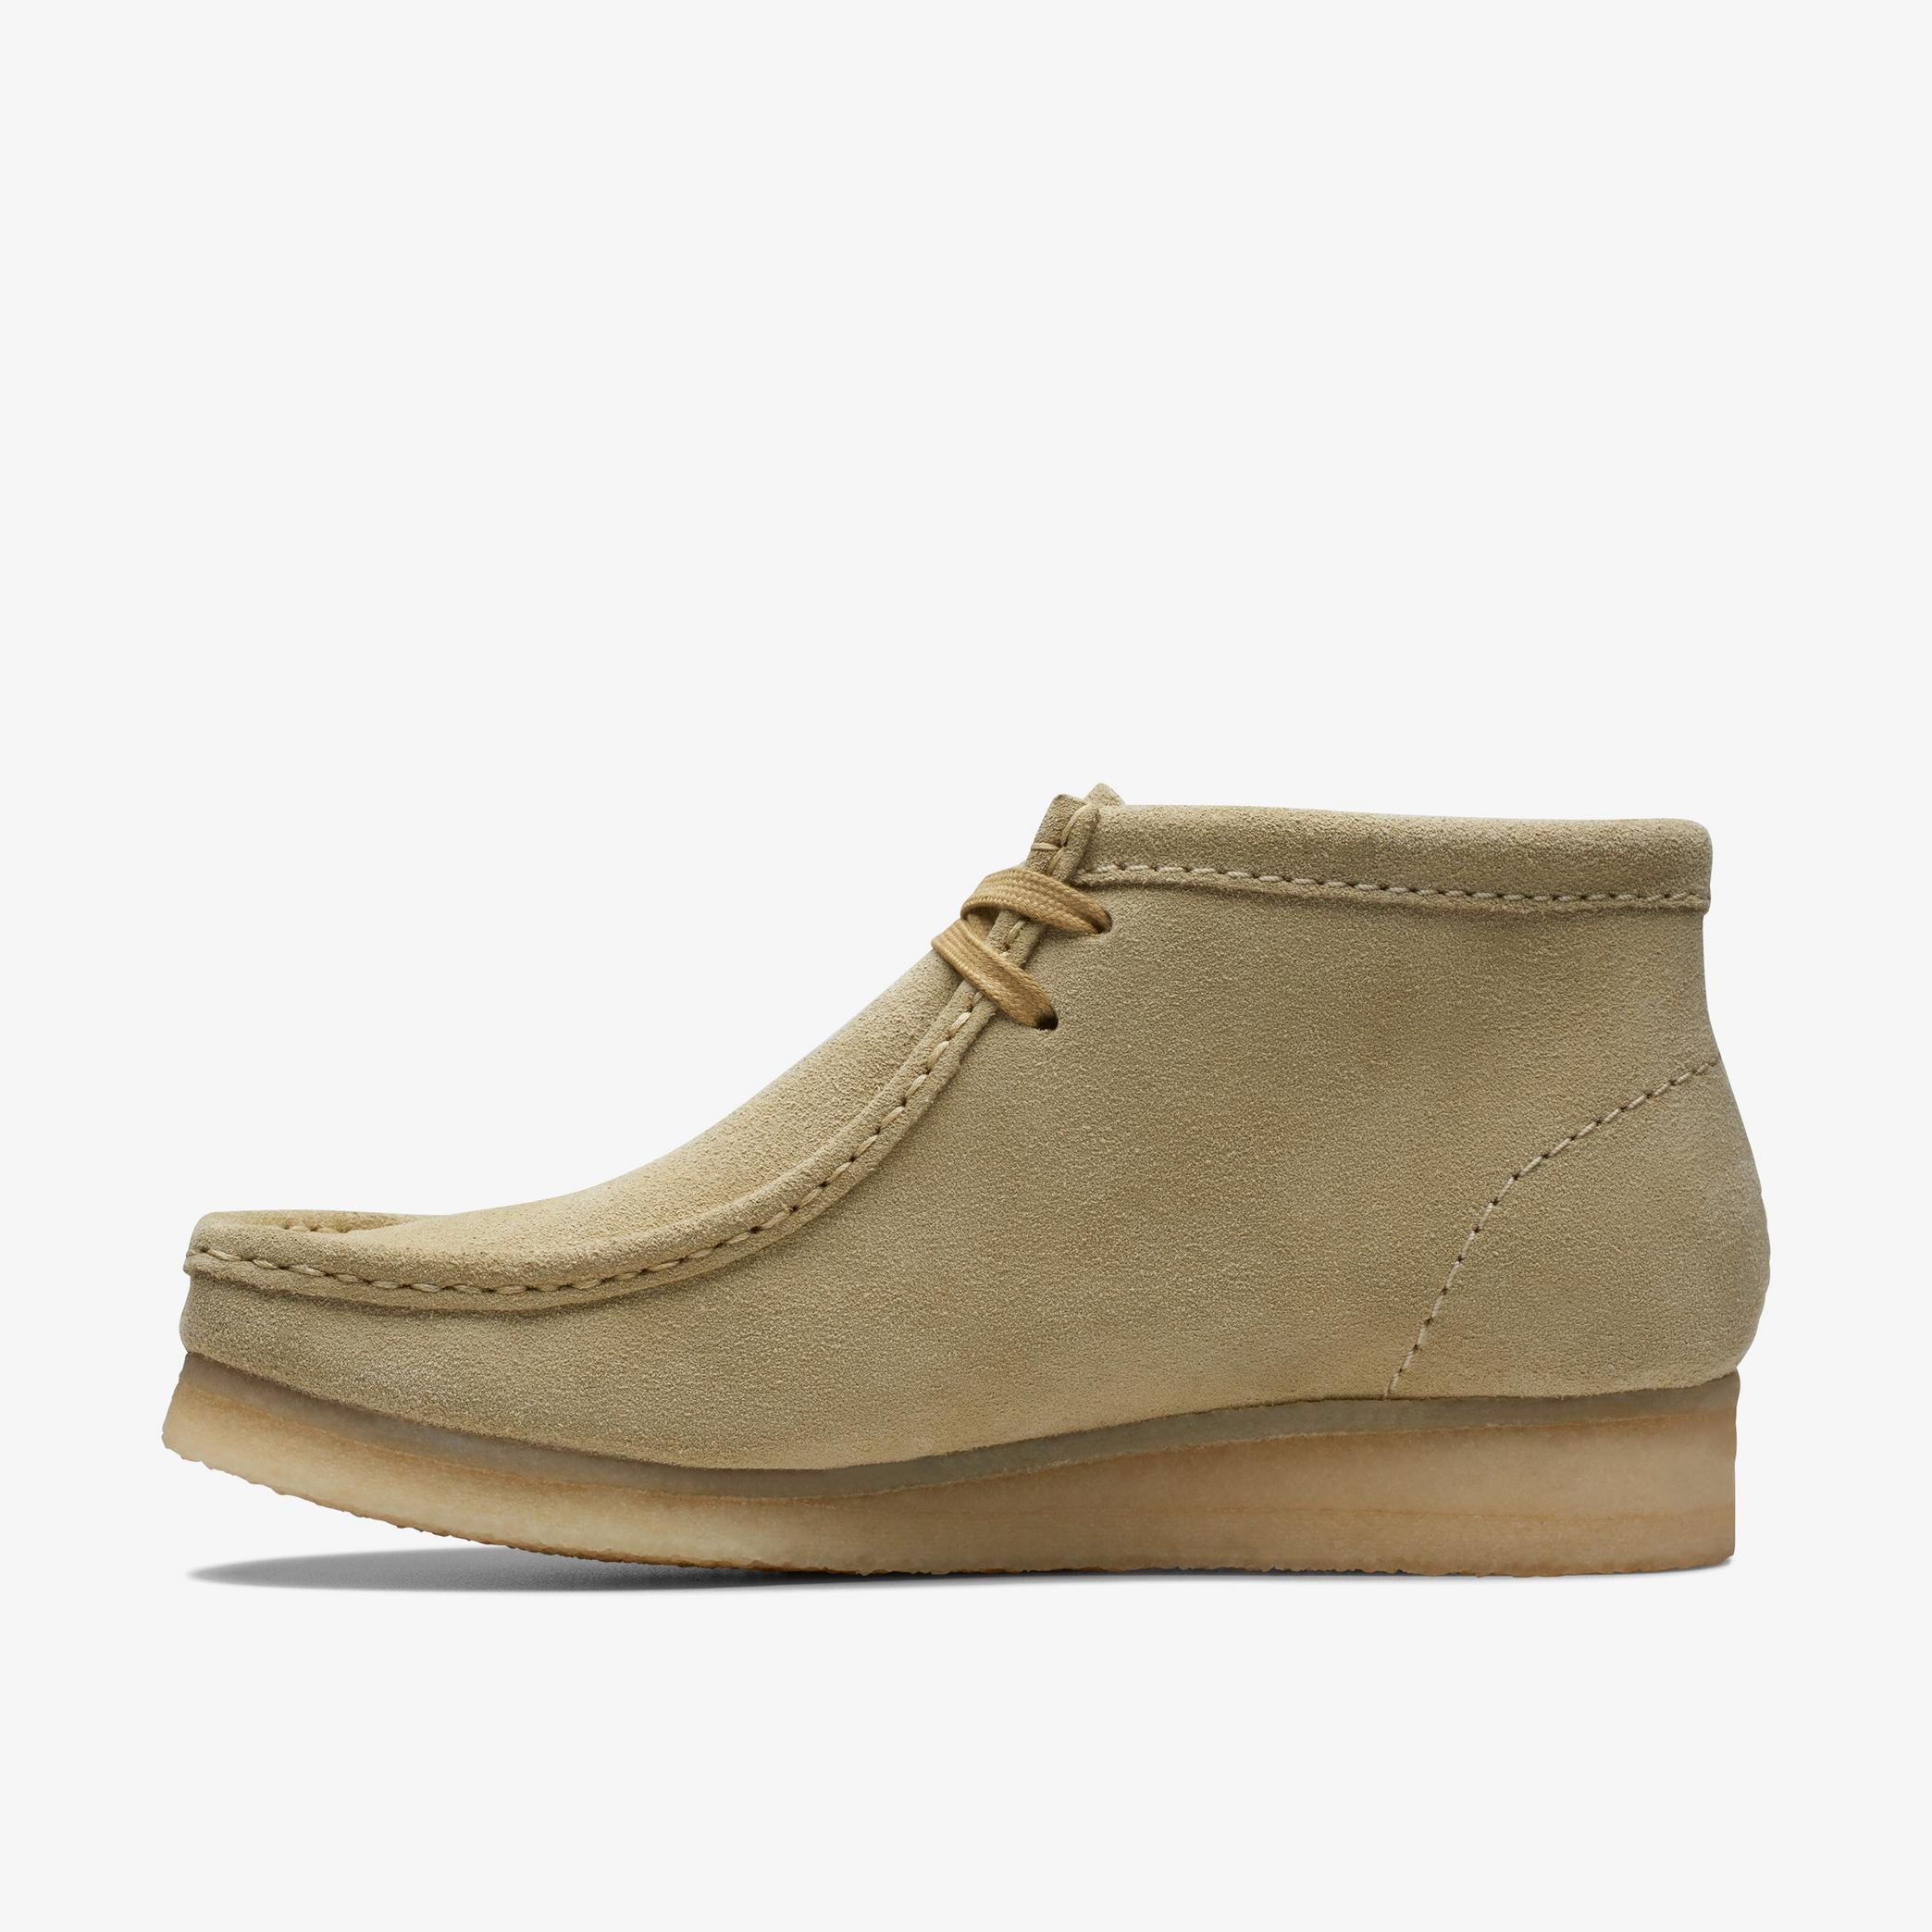 Wallabee Boot Maple Suede Boots, view 2 of 7